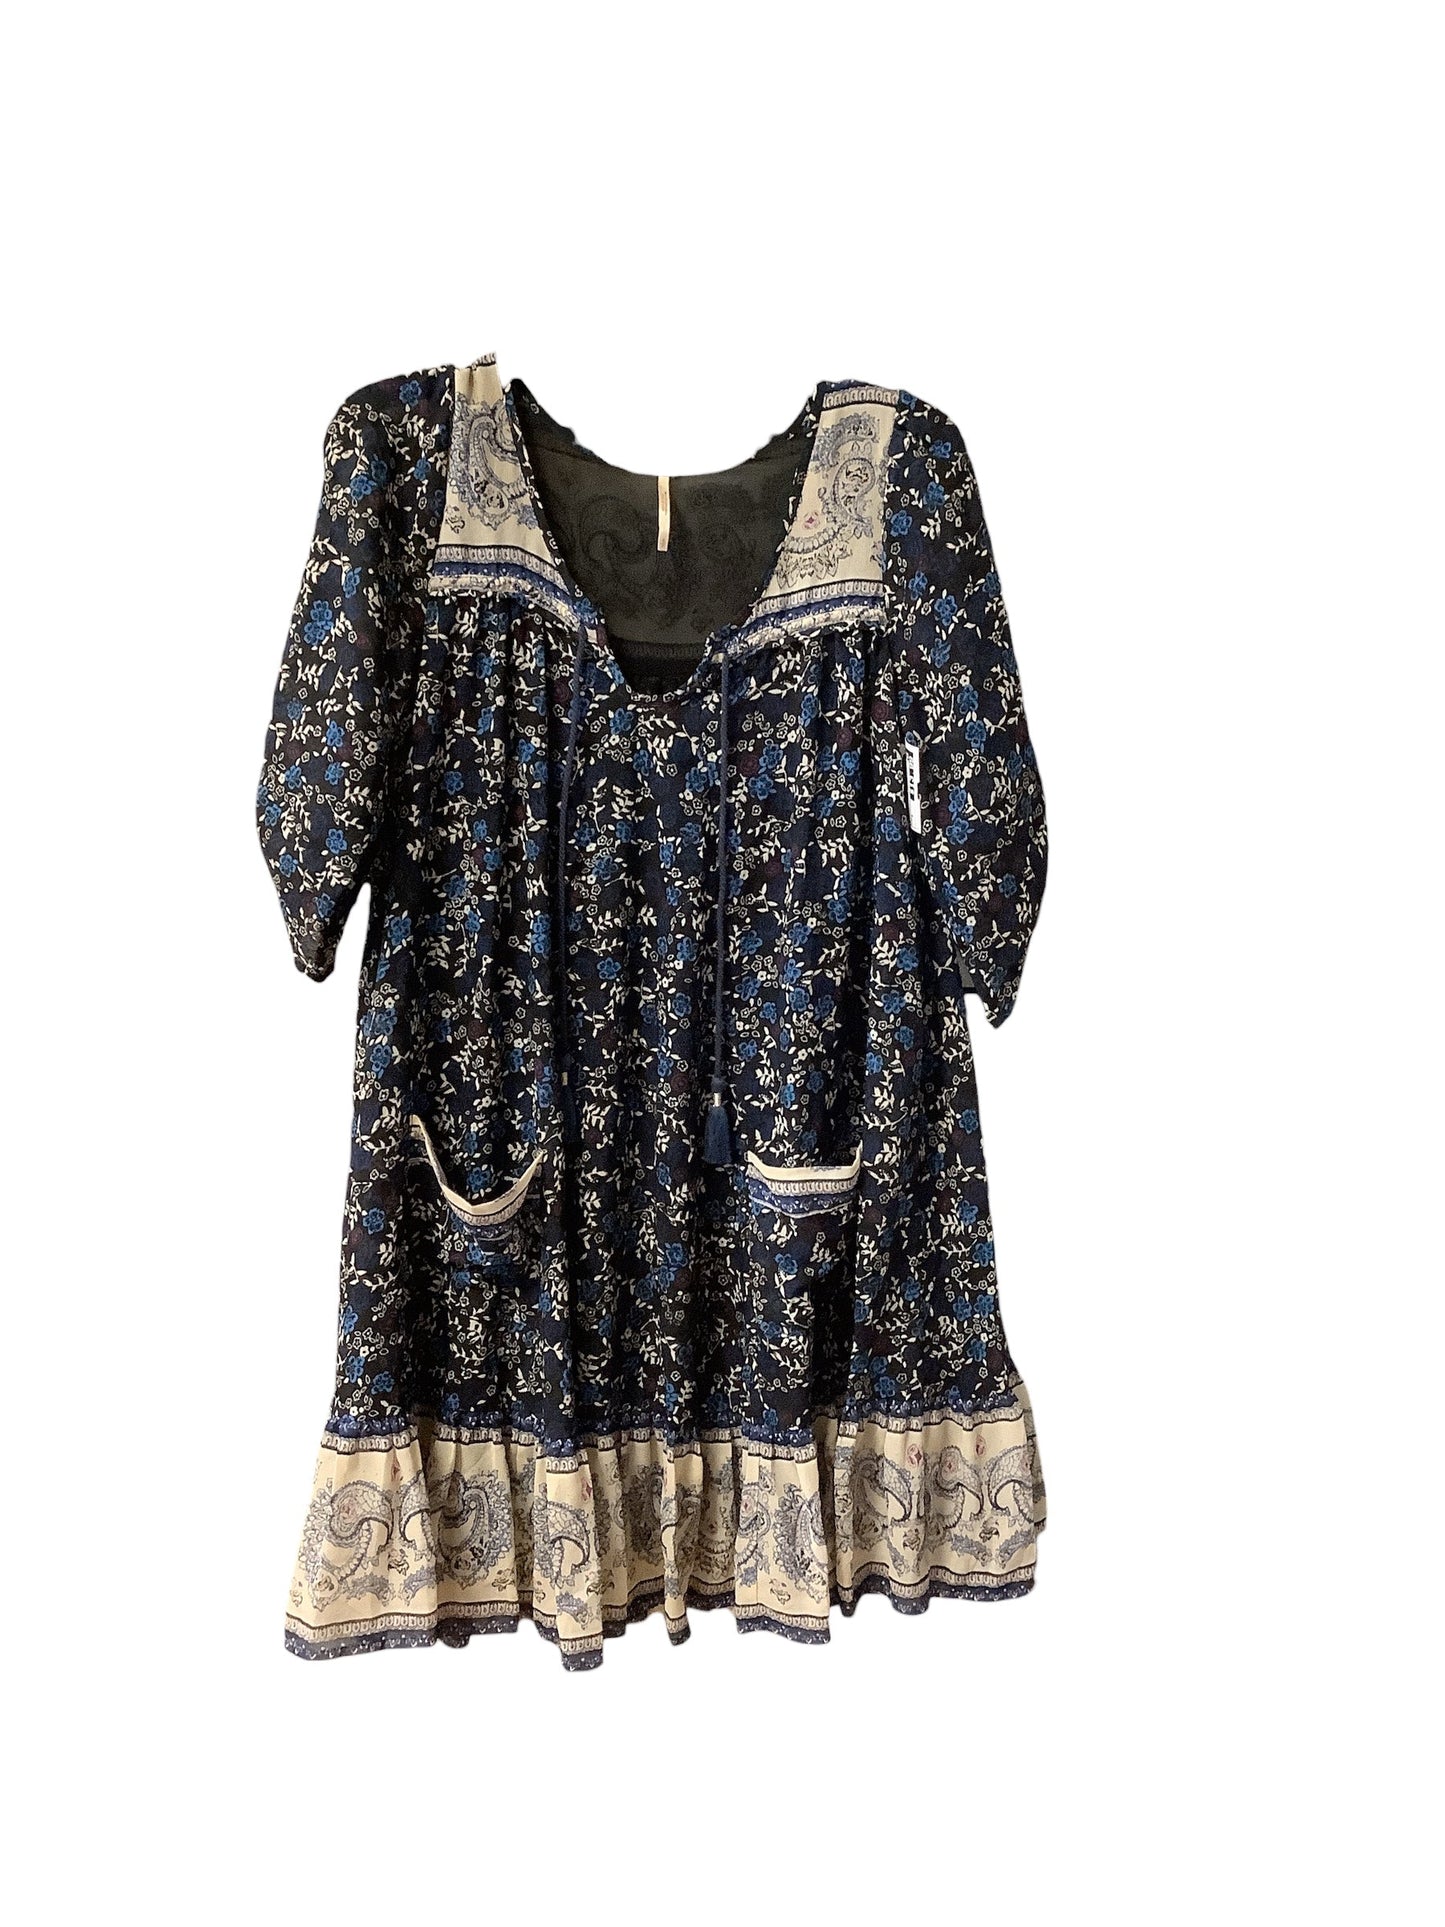 Blue Dress Casual Short Free People, Size S